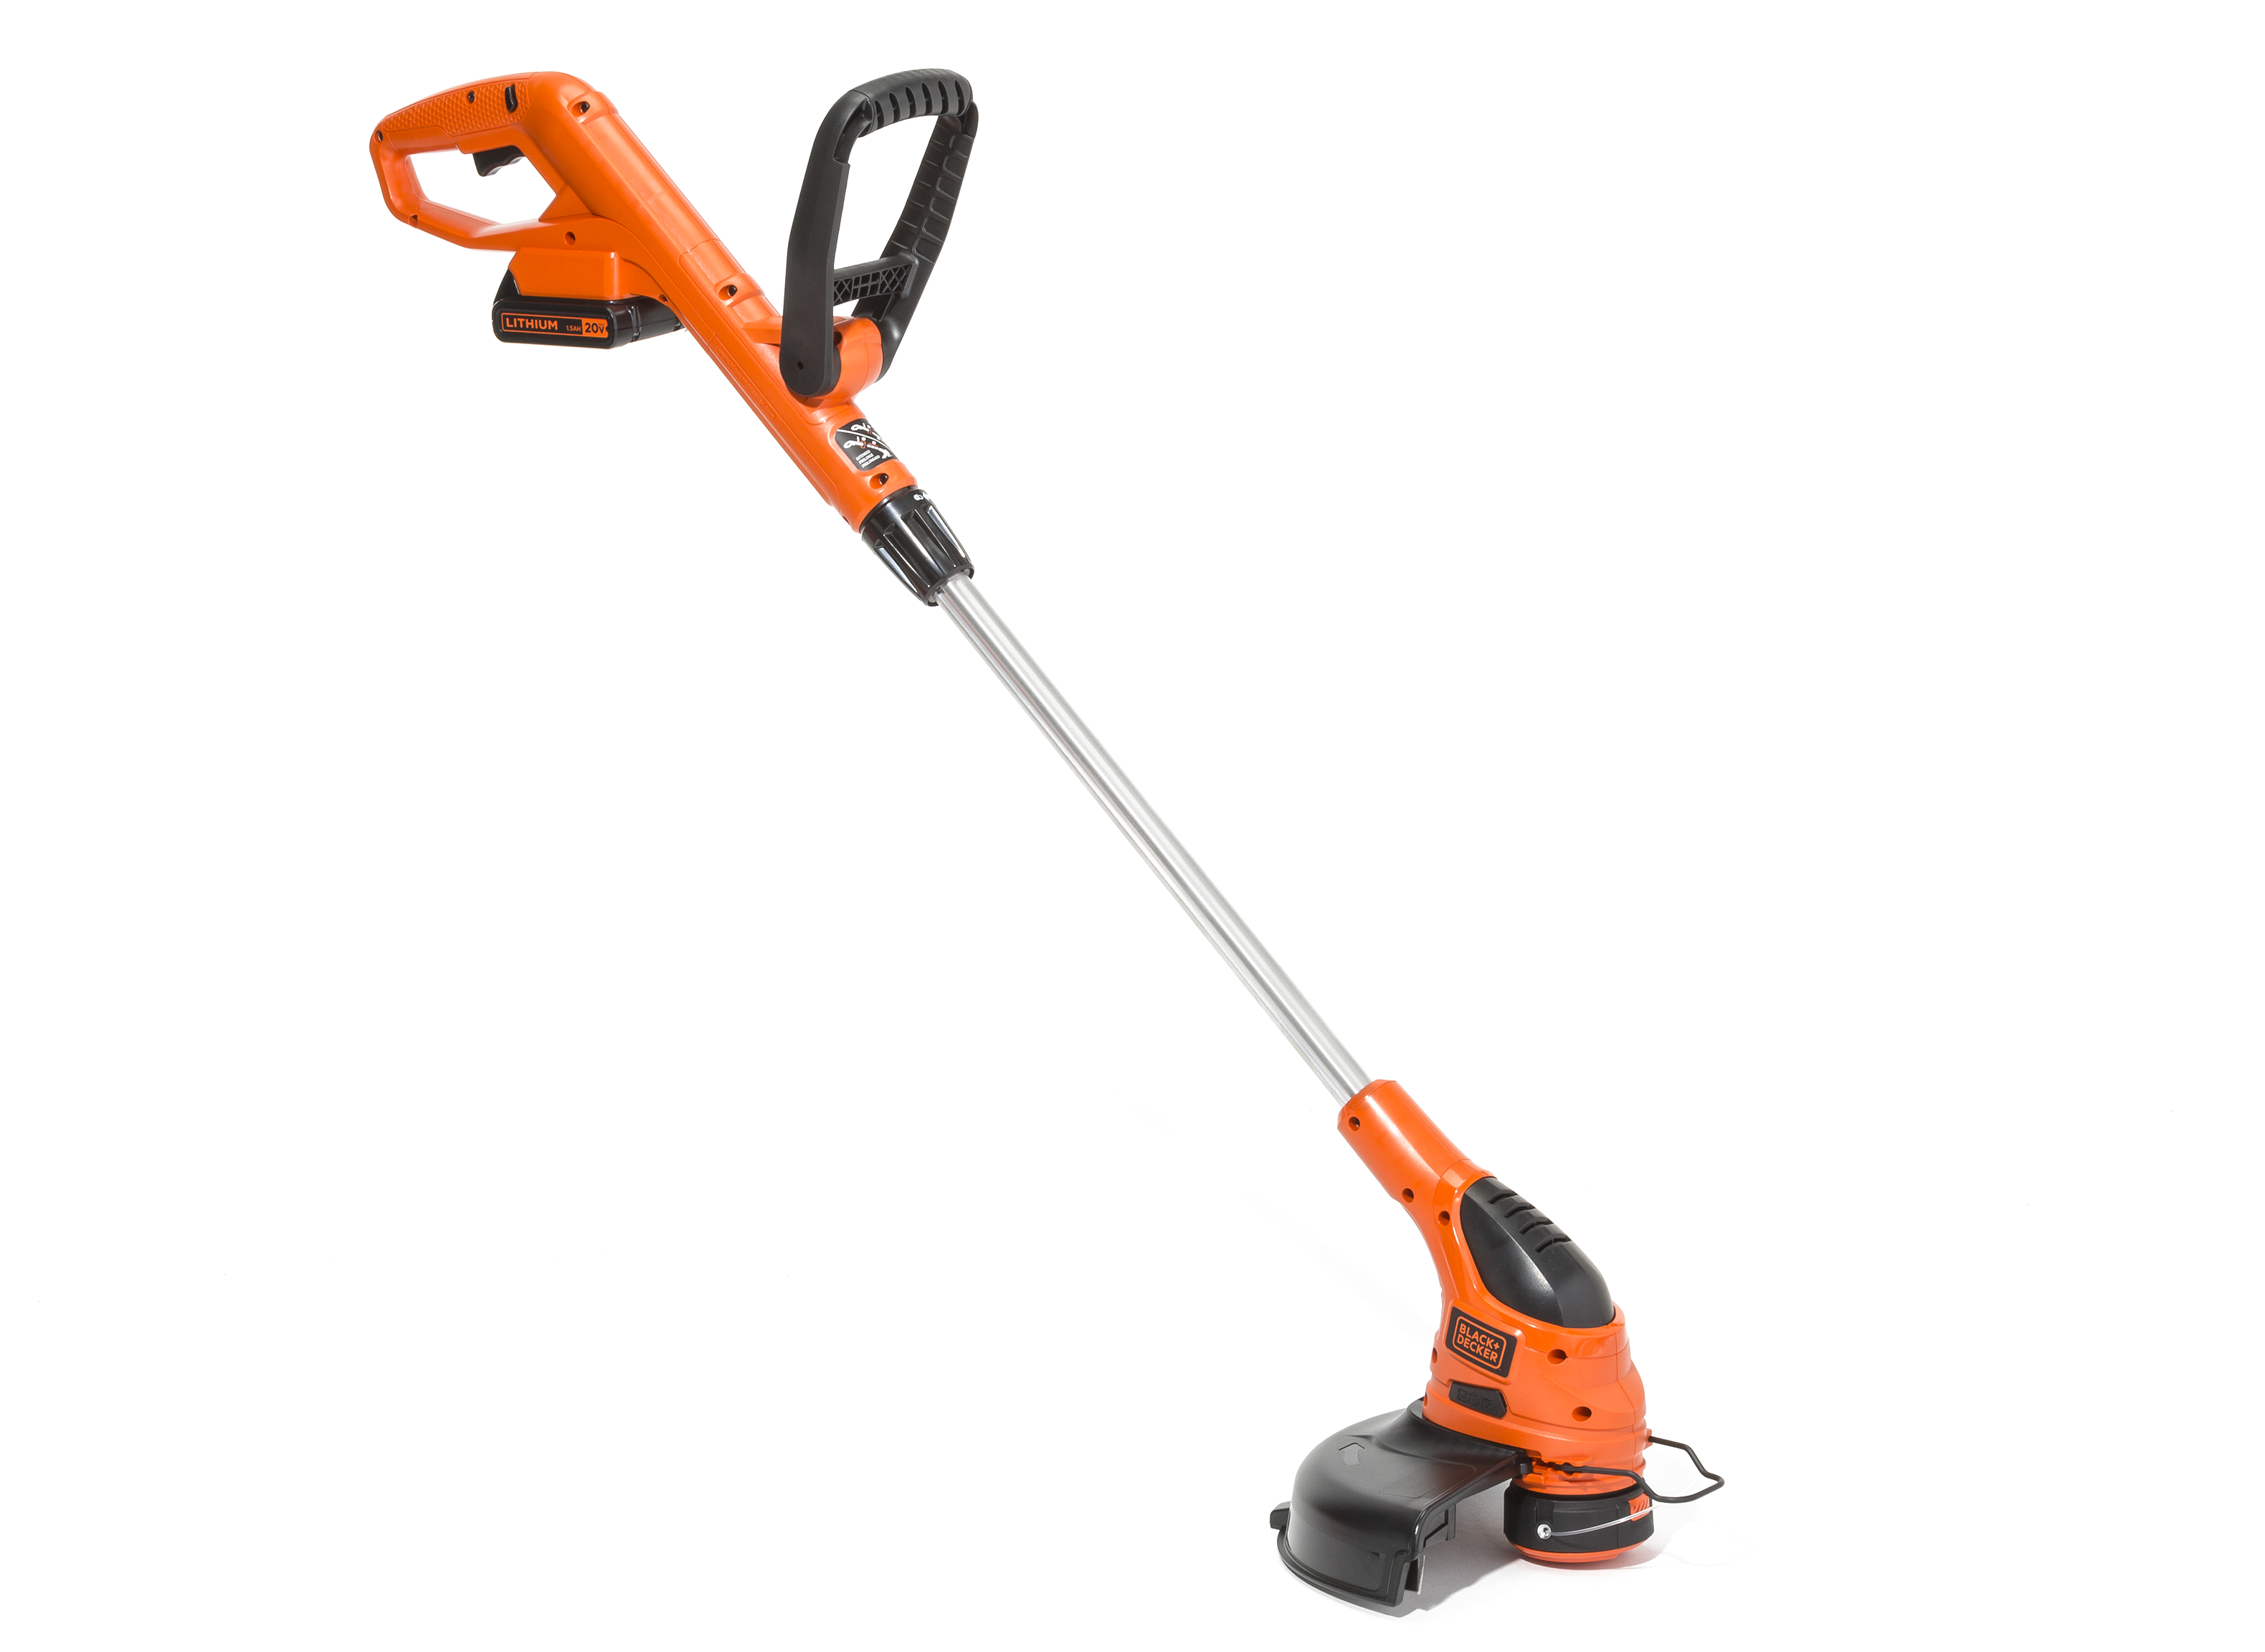 https://crdms.images.consumerreports.org/prod/products/cr/models/383994-stringtrimmers-blackdecker-lst220.png